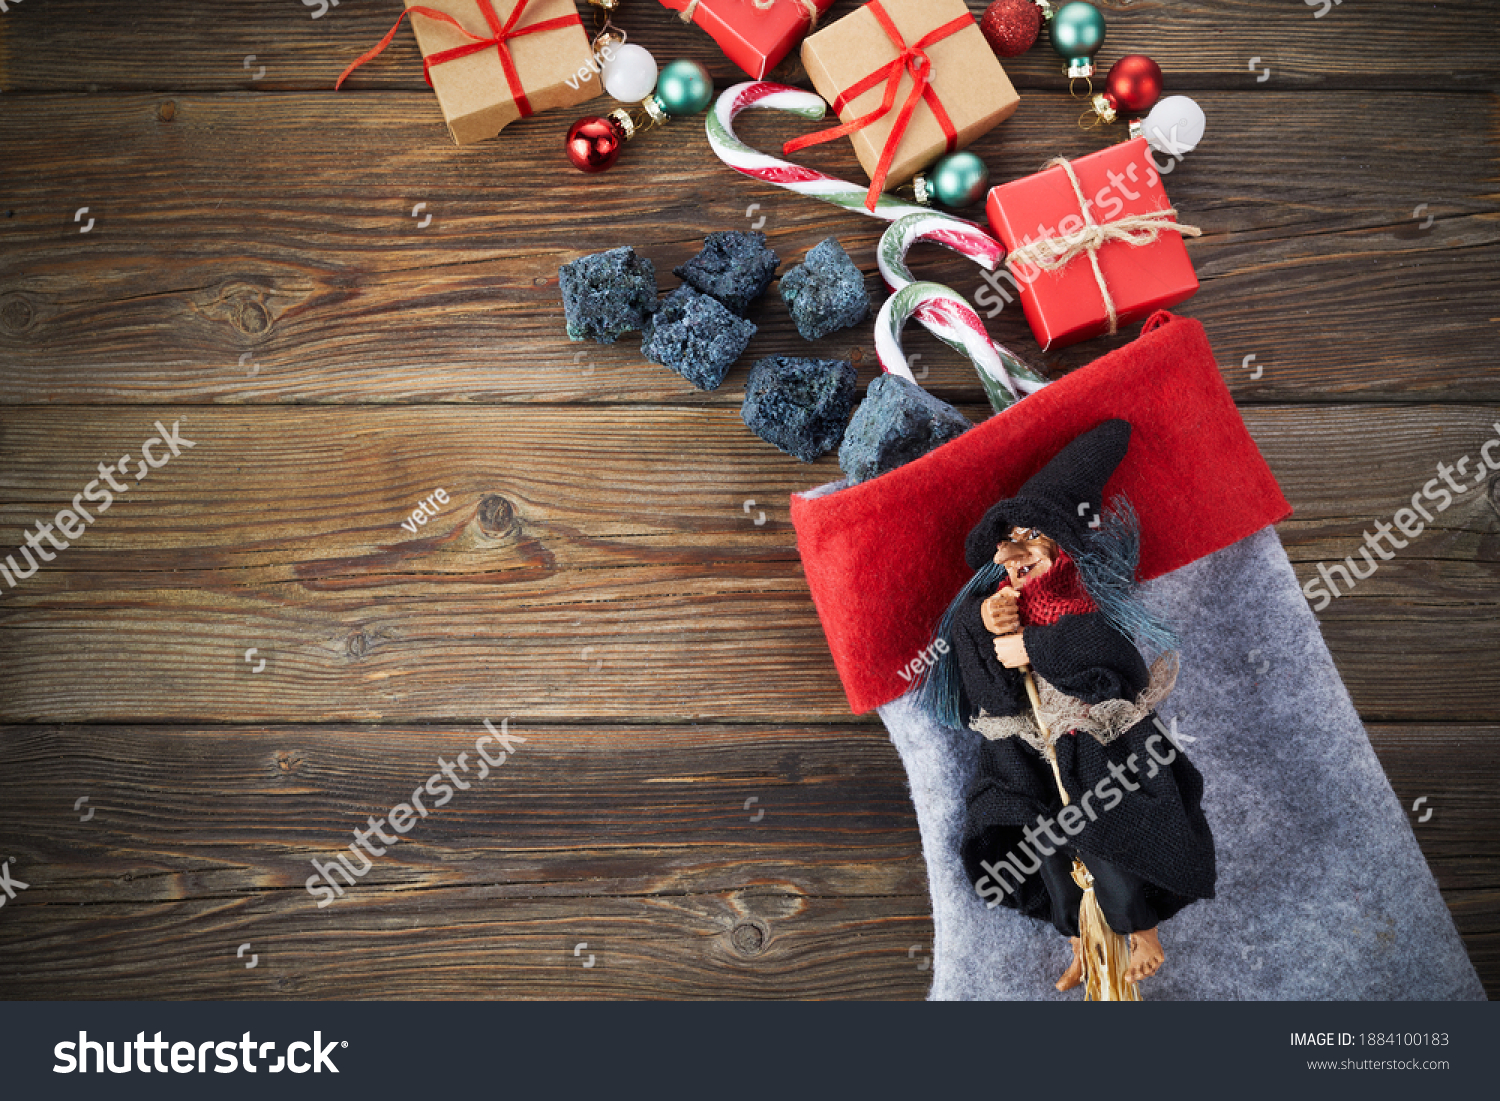 The Befana with sweet coal and candy on wooden background. Italian Epiphany day tradition. #1884100183